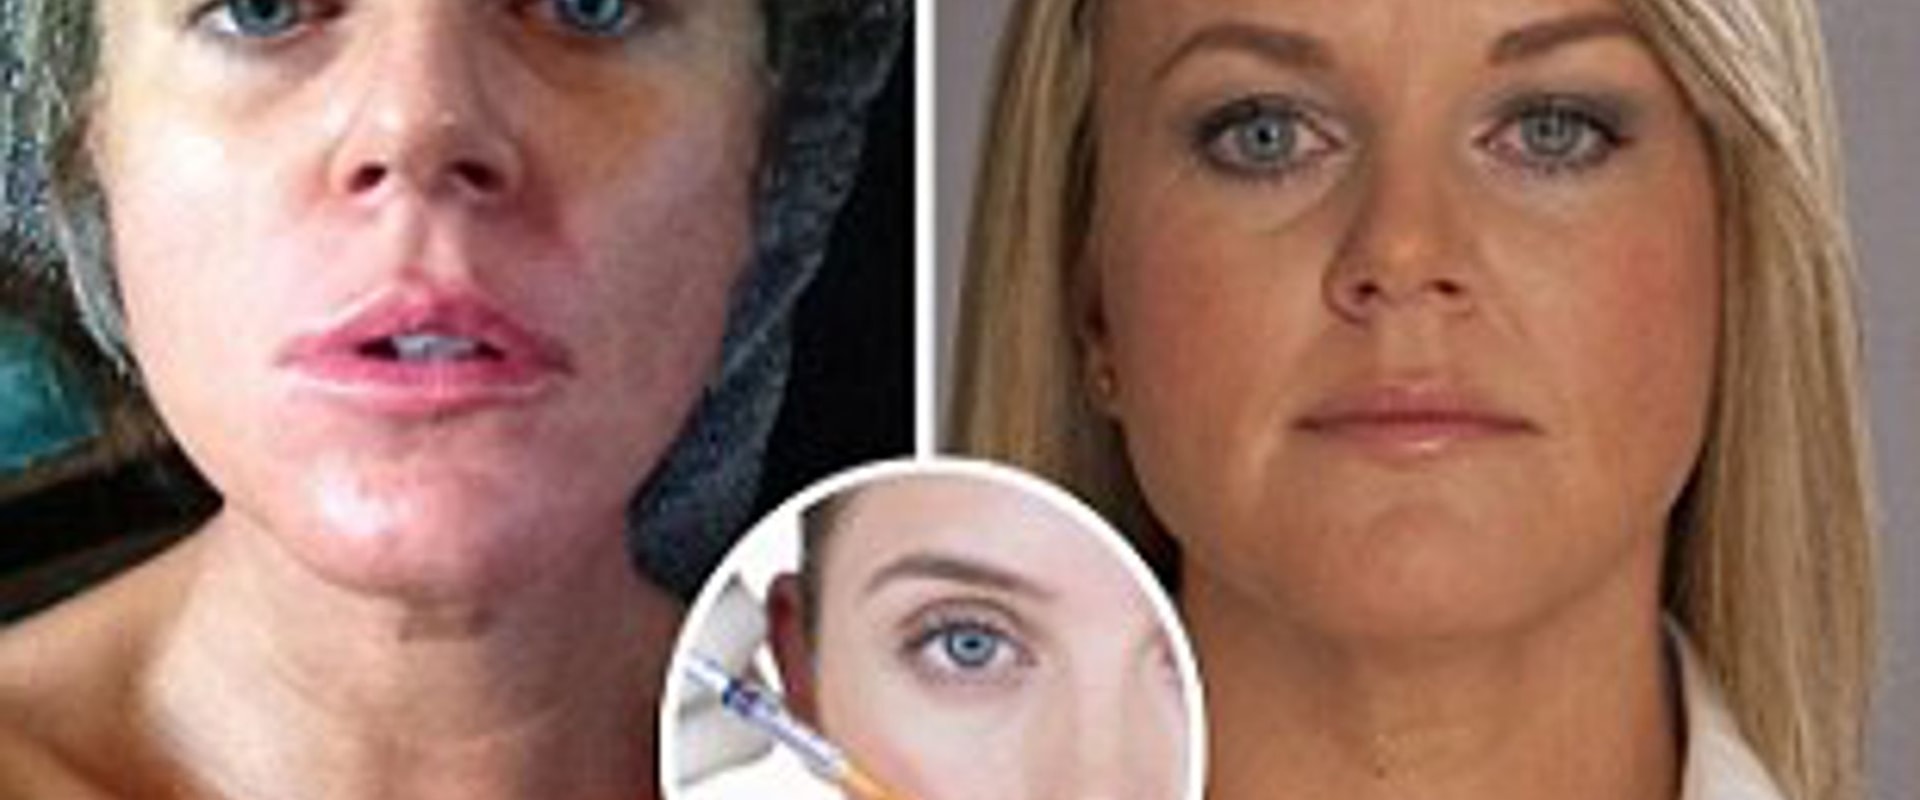 Are Face Fillers Safe? An Expert's Perspective